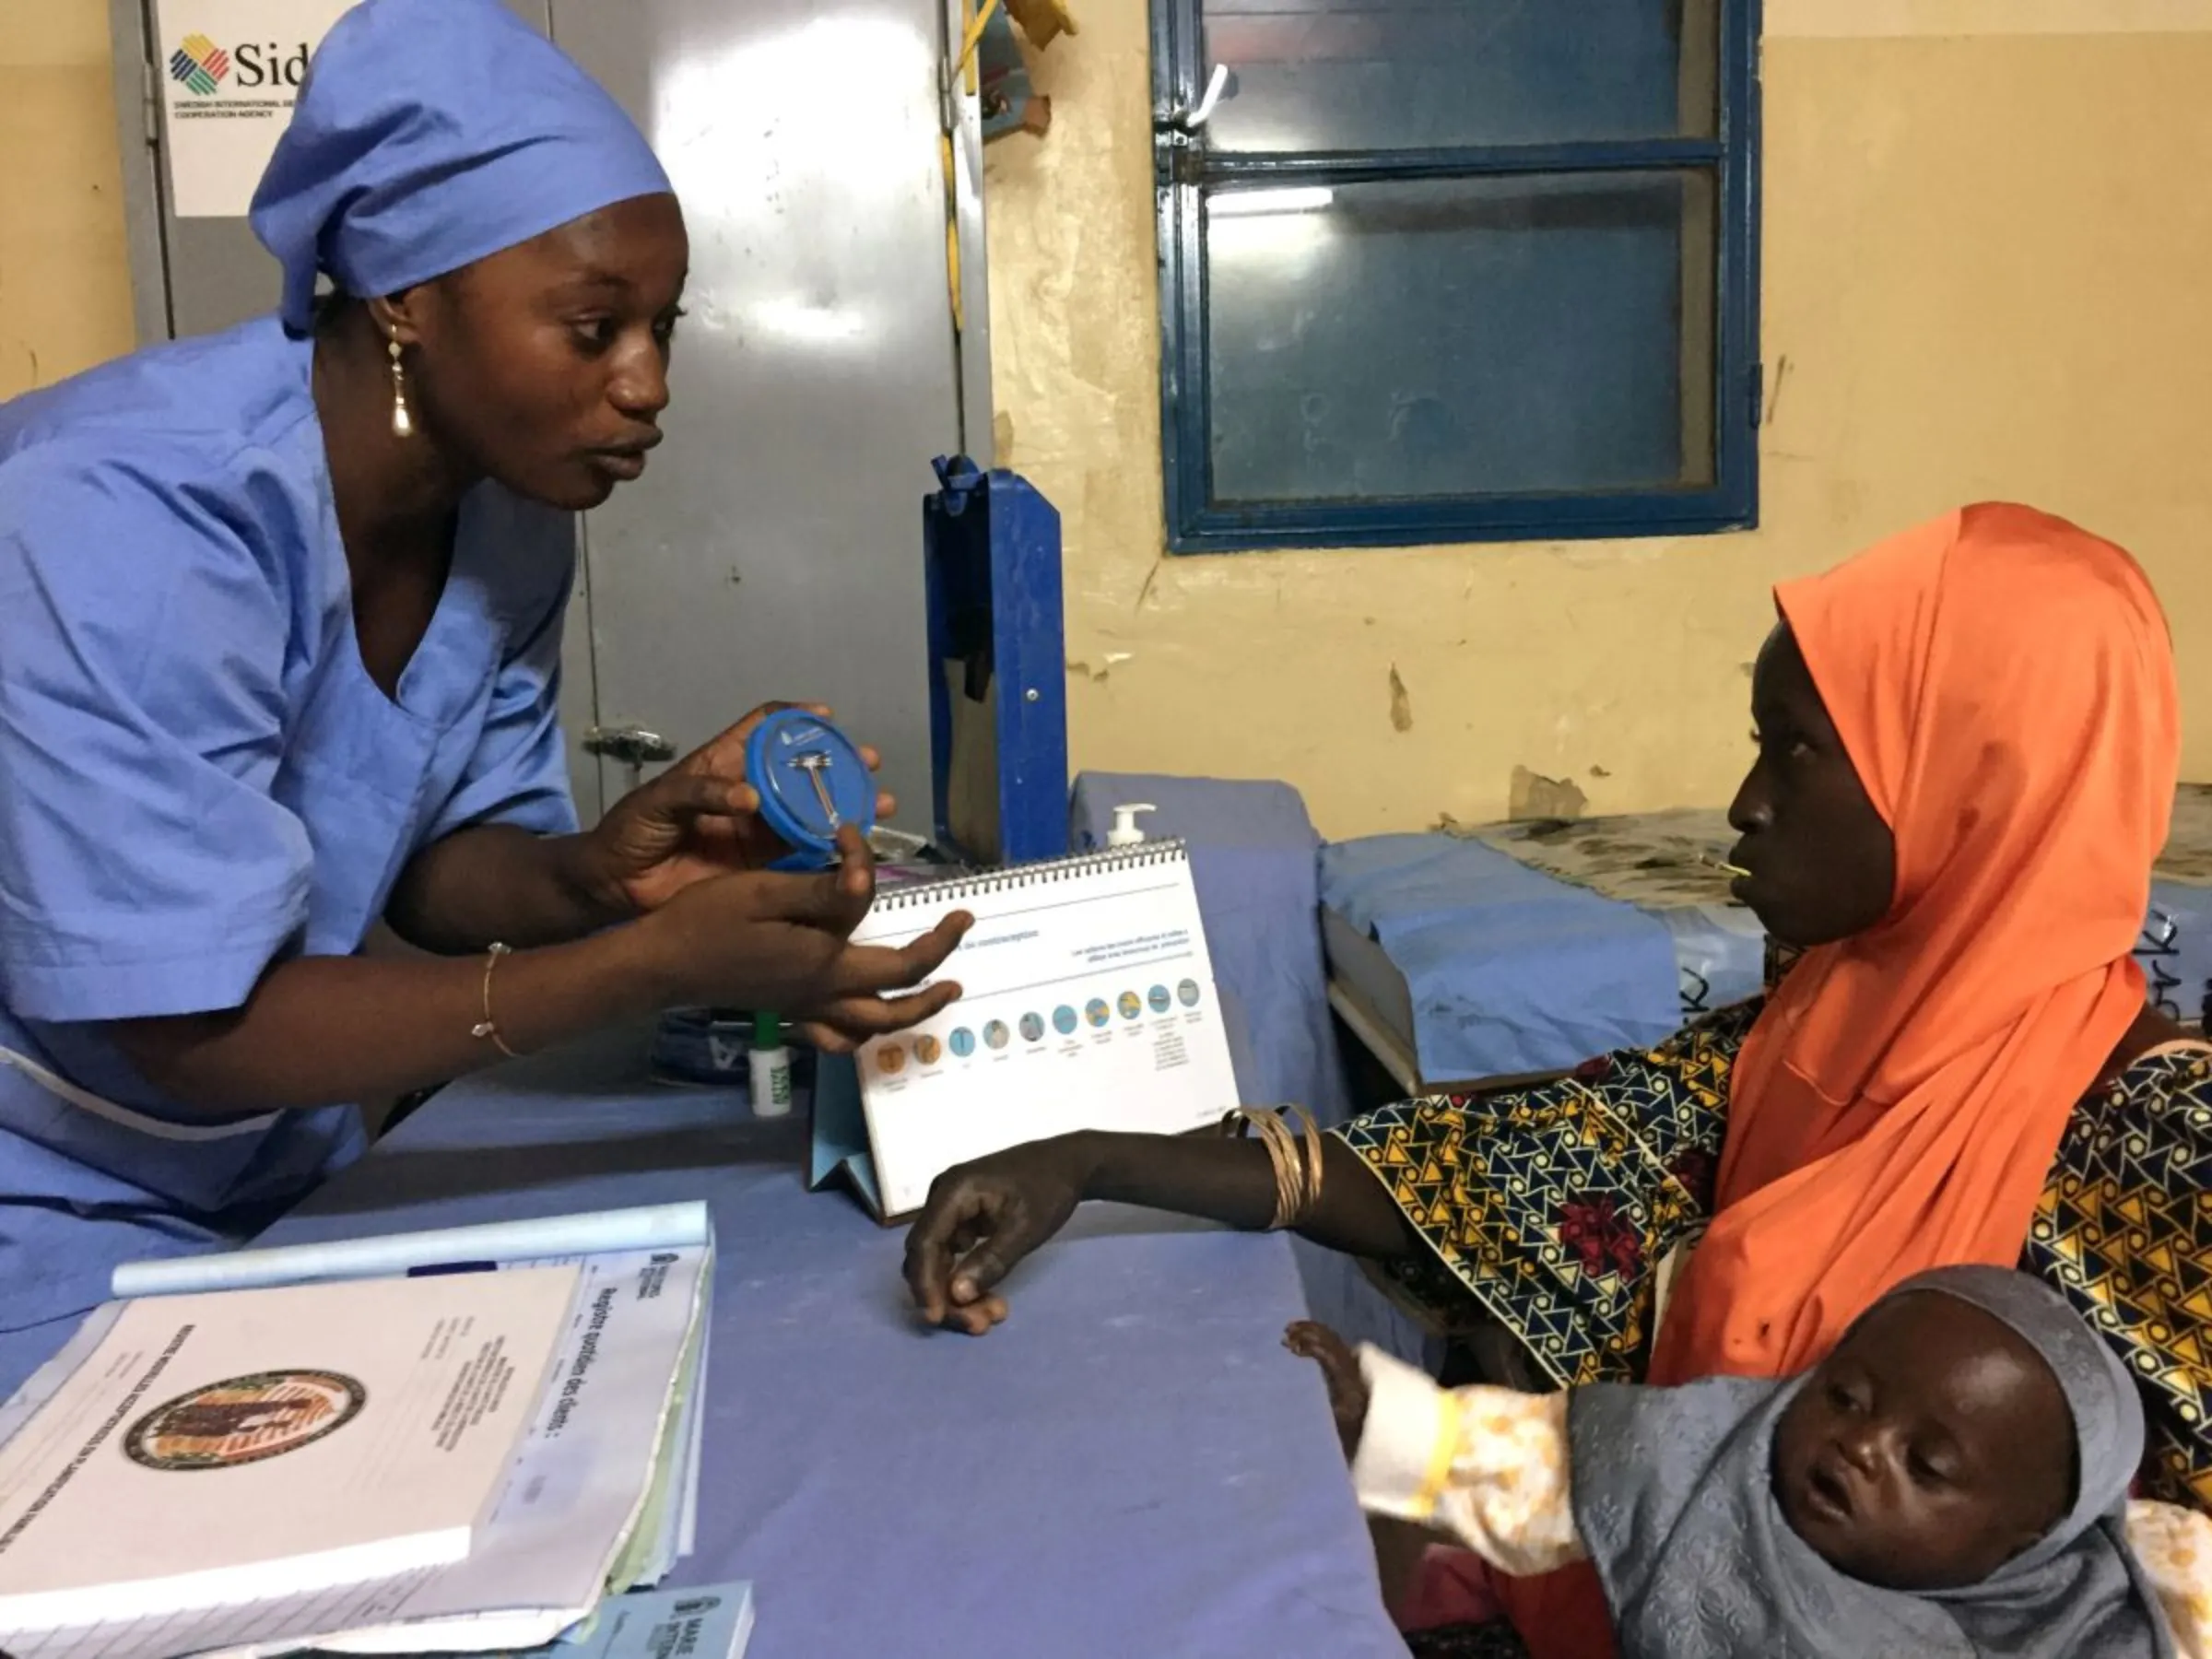 A Marie Stopes nurse explains to mother-of-three Kadidja Toudjani how a contraceptive implant works in Niger's village of Libore, about 20km southeast of the capital Niamey, Niger November 2, 2017